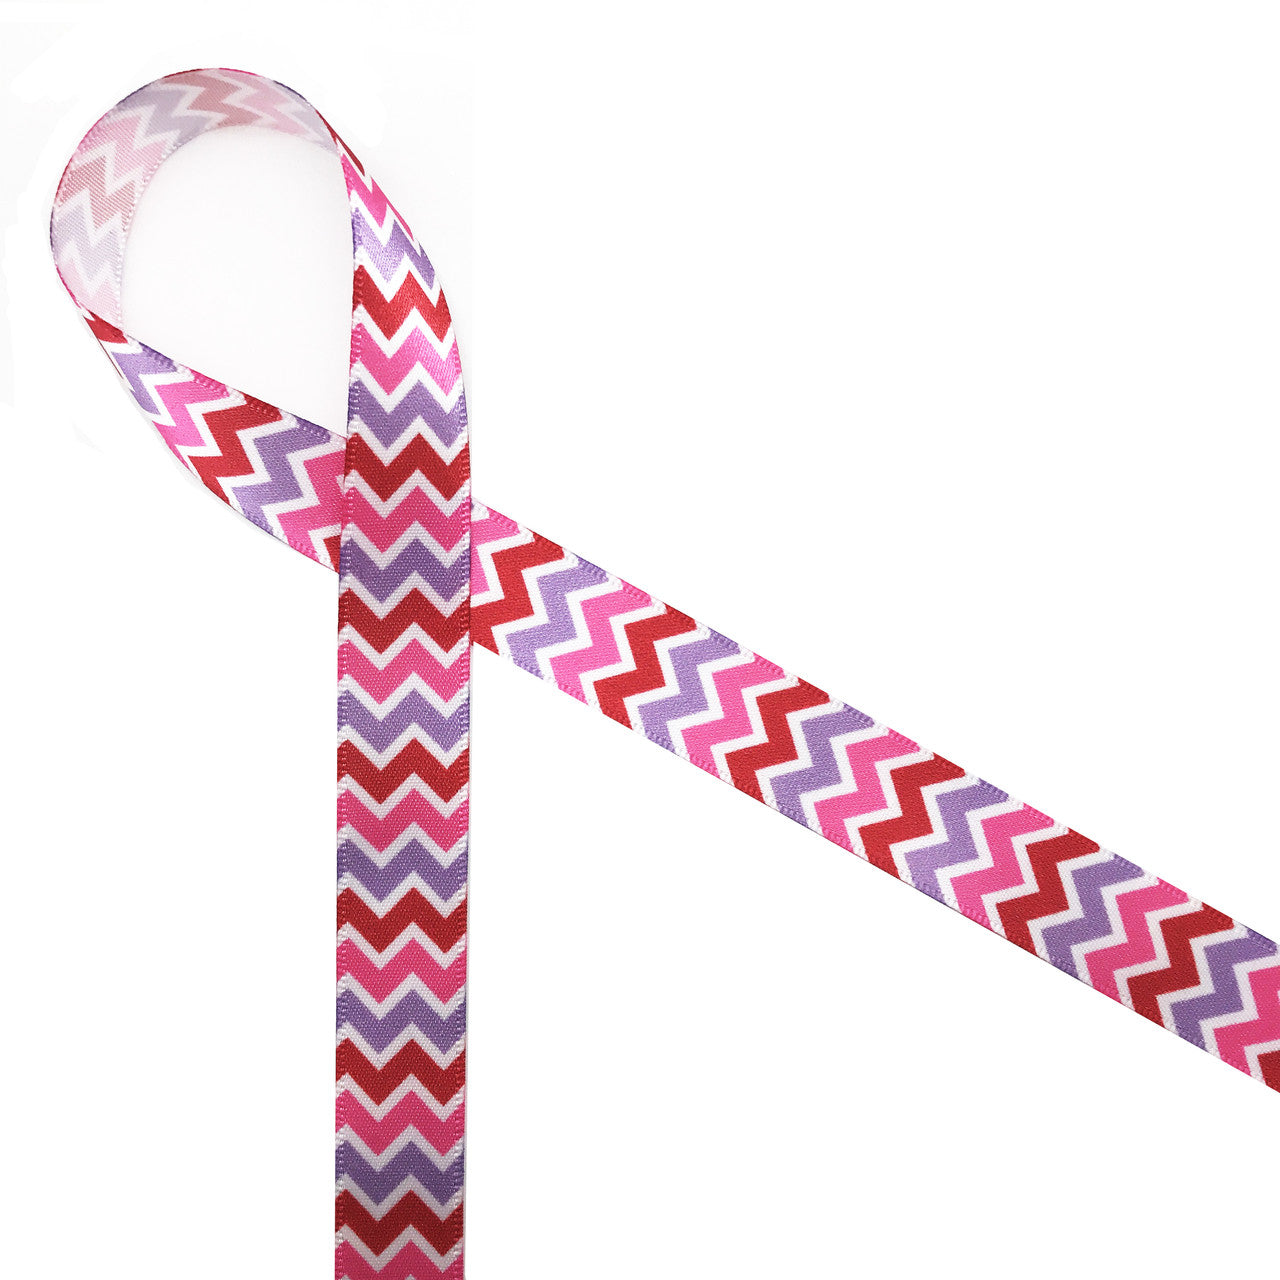 Valentine chevron pattern feature red, pink and lavender on 5/8" white single face satin! This fun ribbon is perfect for giving your Valentine's Day love!